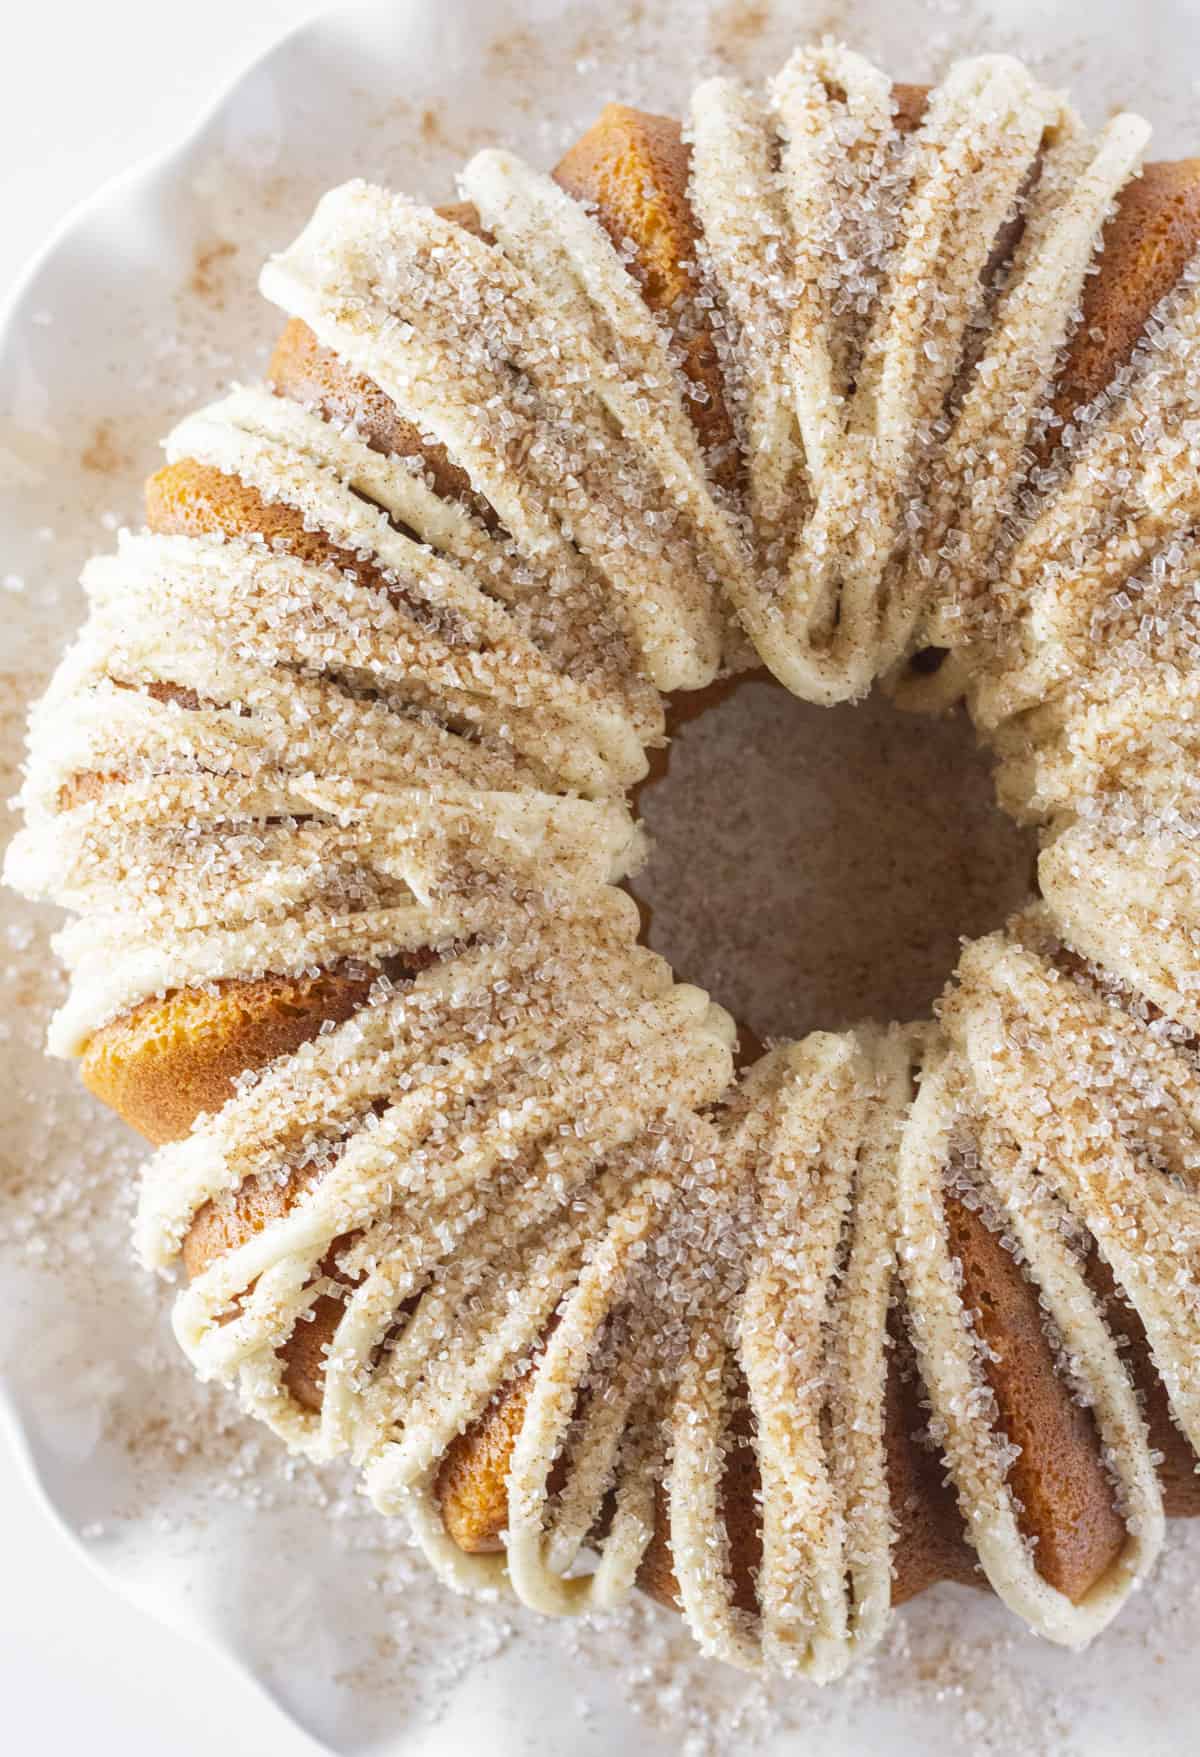 Looking down on a whole Snickerdoodle Bundt Cake with cinnamon sugar topping.